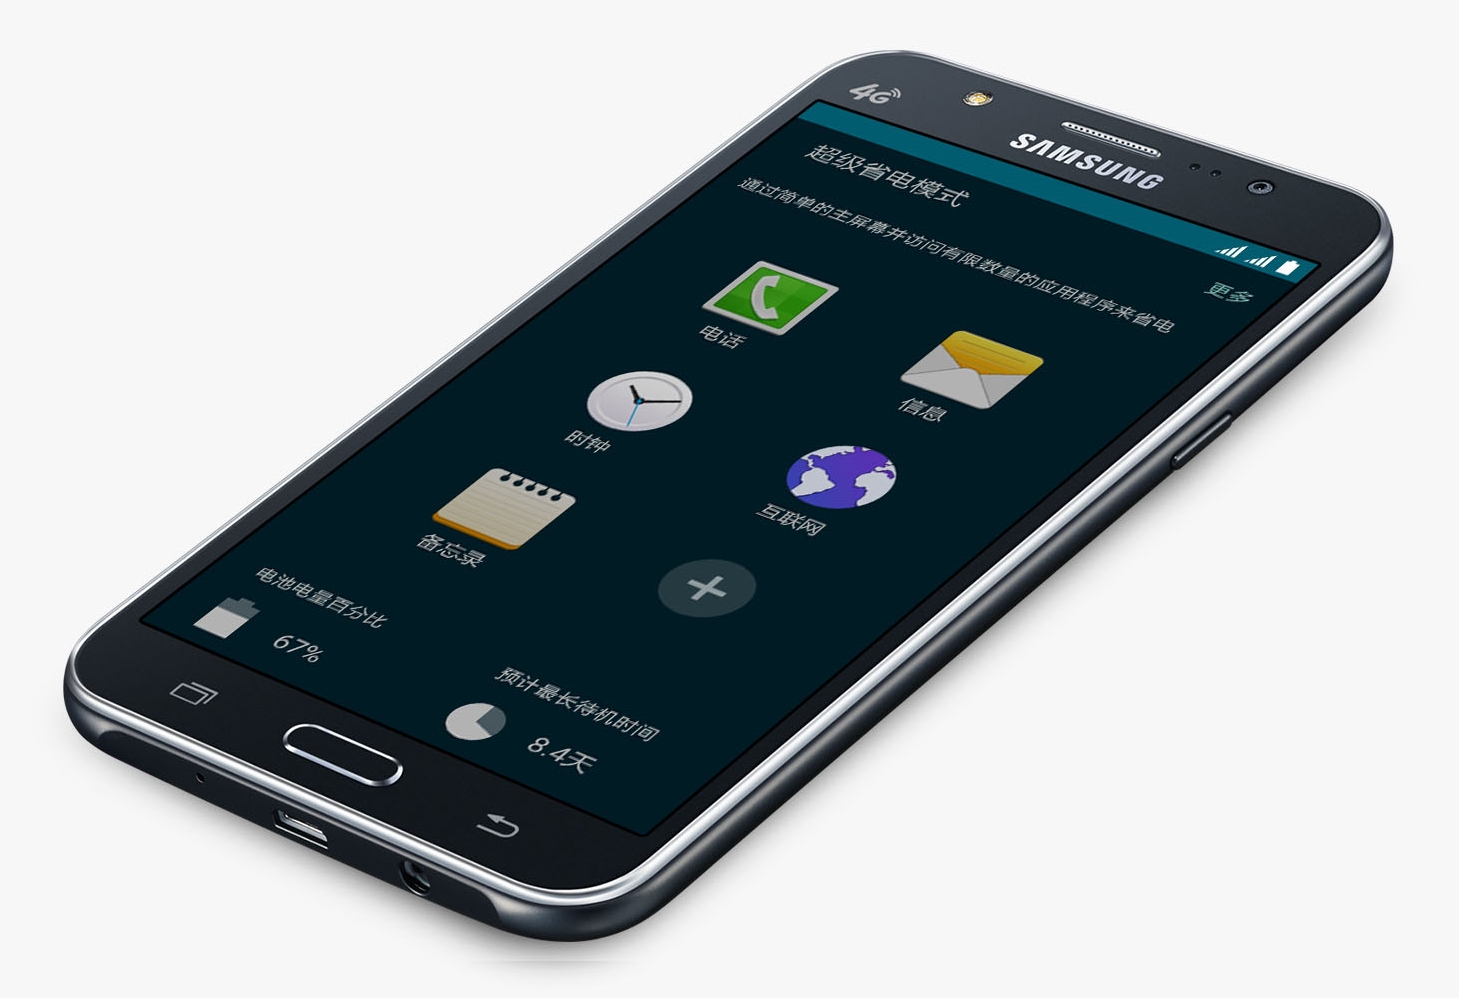 Samsung’s first smartphones with front-facing LED flash ...